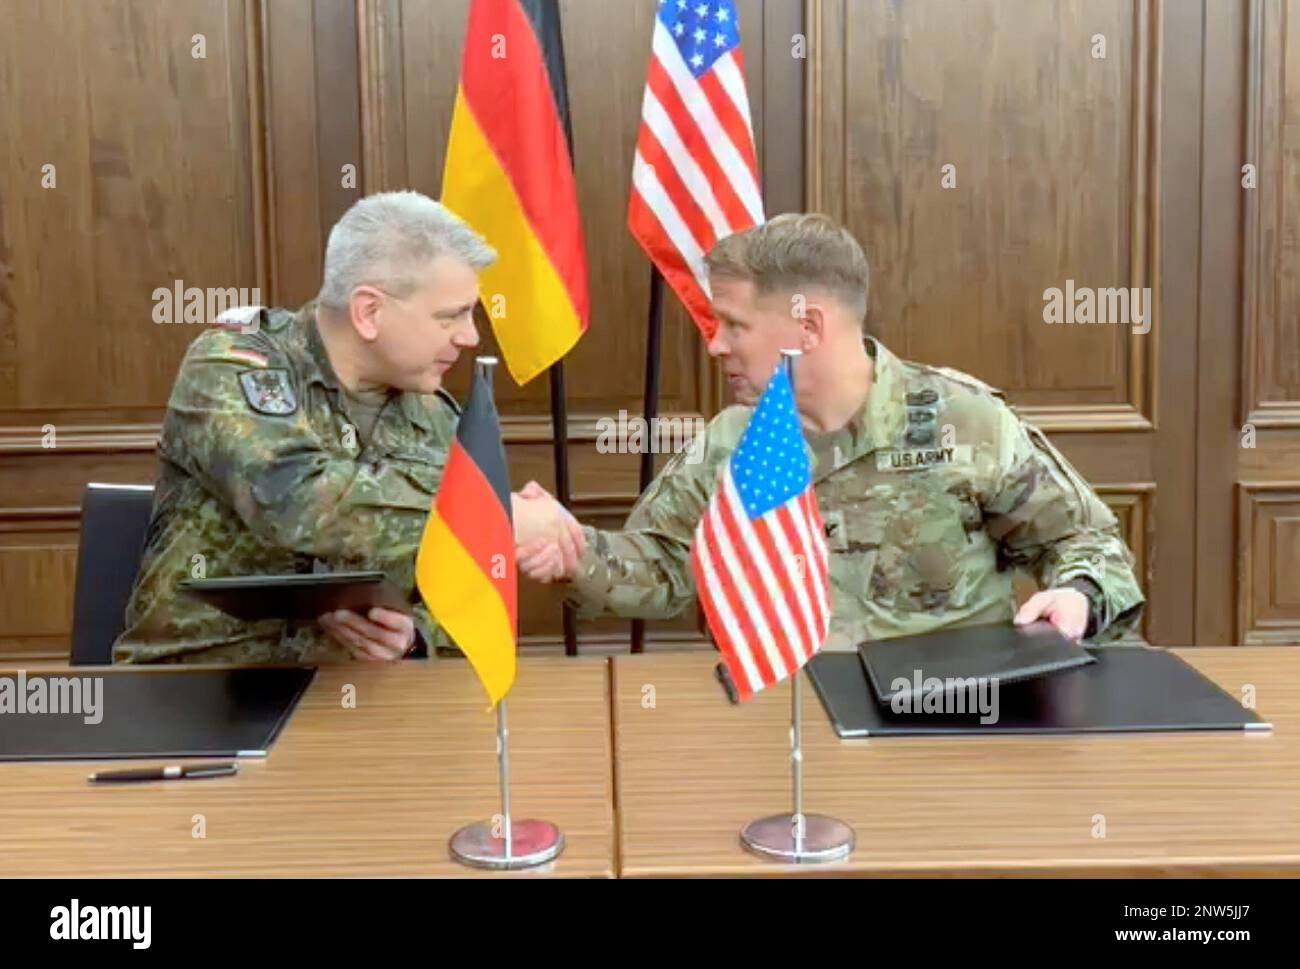 Col. Jon Dunn, Chief of International Affairs Division, G-3/5, Headquarters Department of the Army and Lt. Col. Christoph Kuhlmann, Director of the Bilateral-Multilateral, International Cooperation Branch of German Army Command  shake hands after signing a memorandum of agreement during the U.S.-German Army Staff Talks in Munich Jan. 24-26. The two Soldiers served as the heads of their respective delegations during the talks. Stock Photo